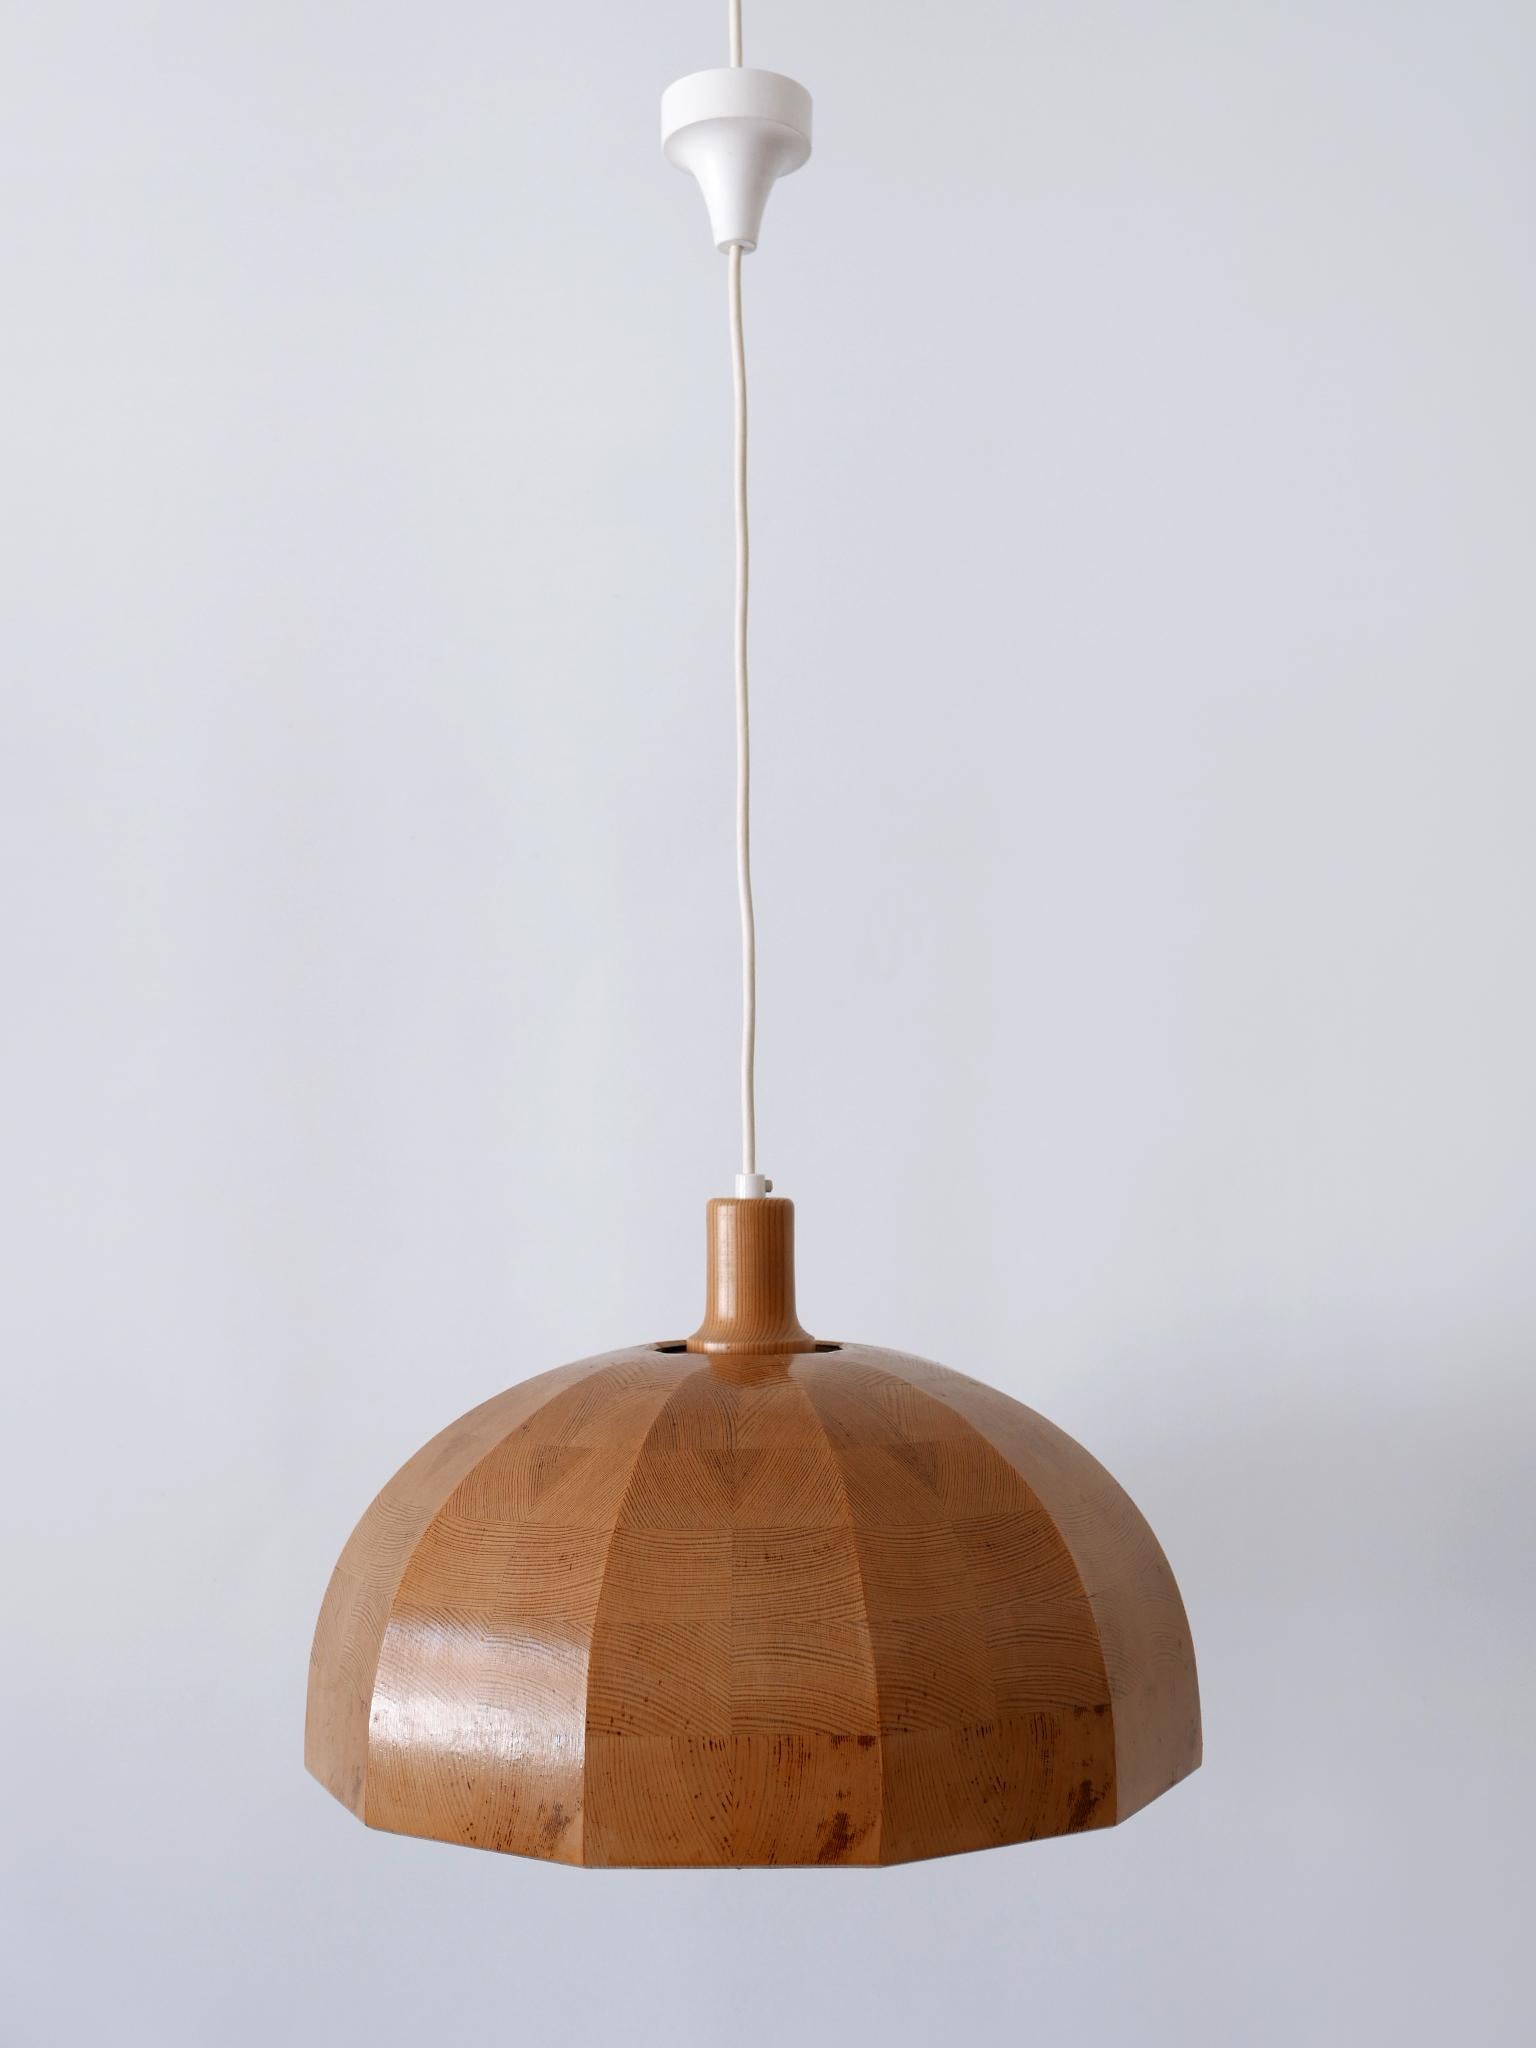 Mid-20th Century Rare Mid-Century Modern Pine Wood Pendant Lamp or Hanging Light Sweden, 1960s For Sale